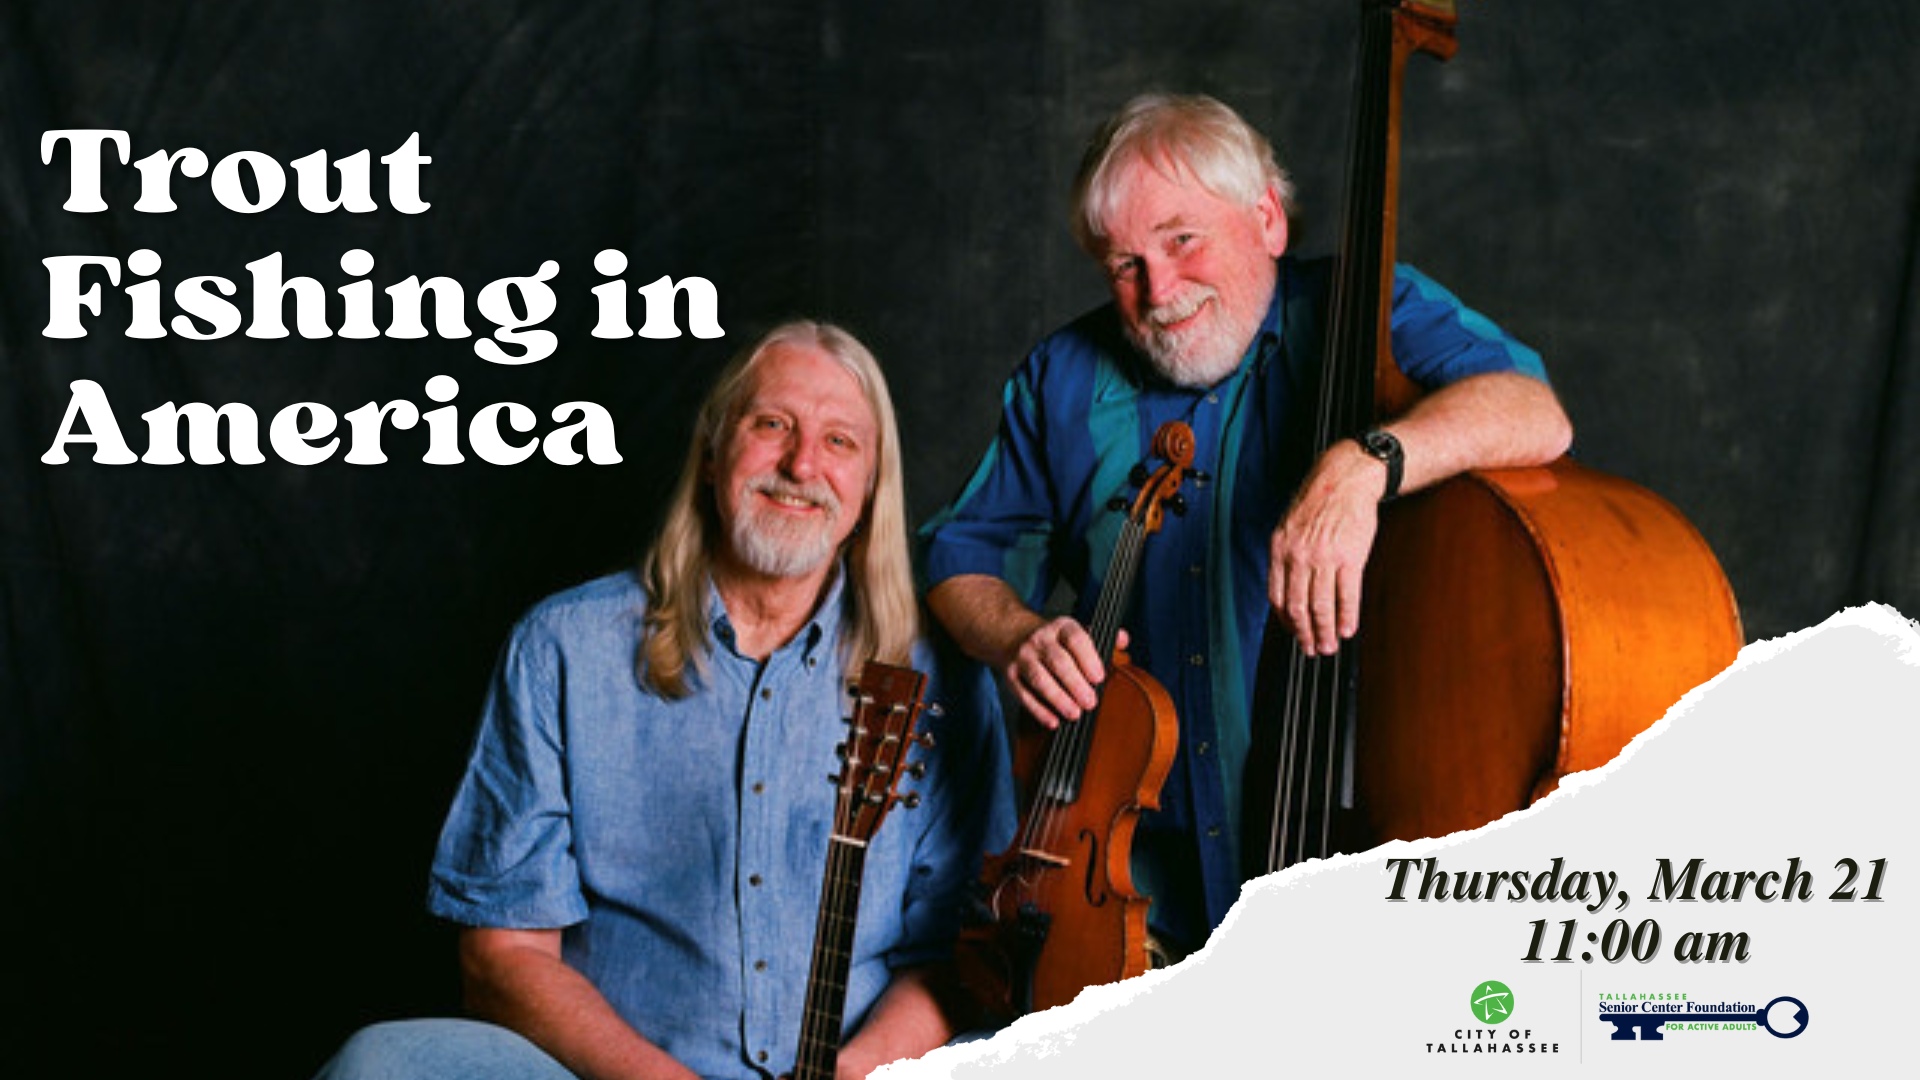 Trout Fishing in America Concert – with optional Songwriting